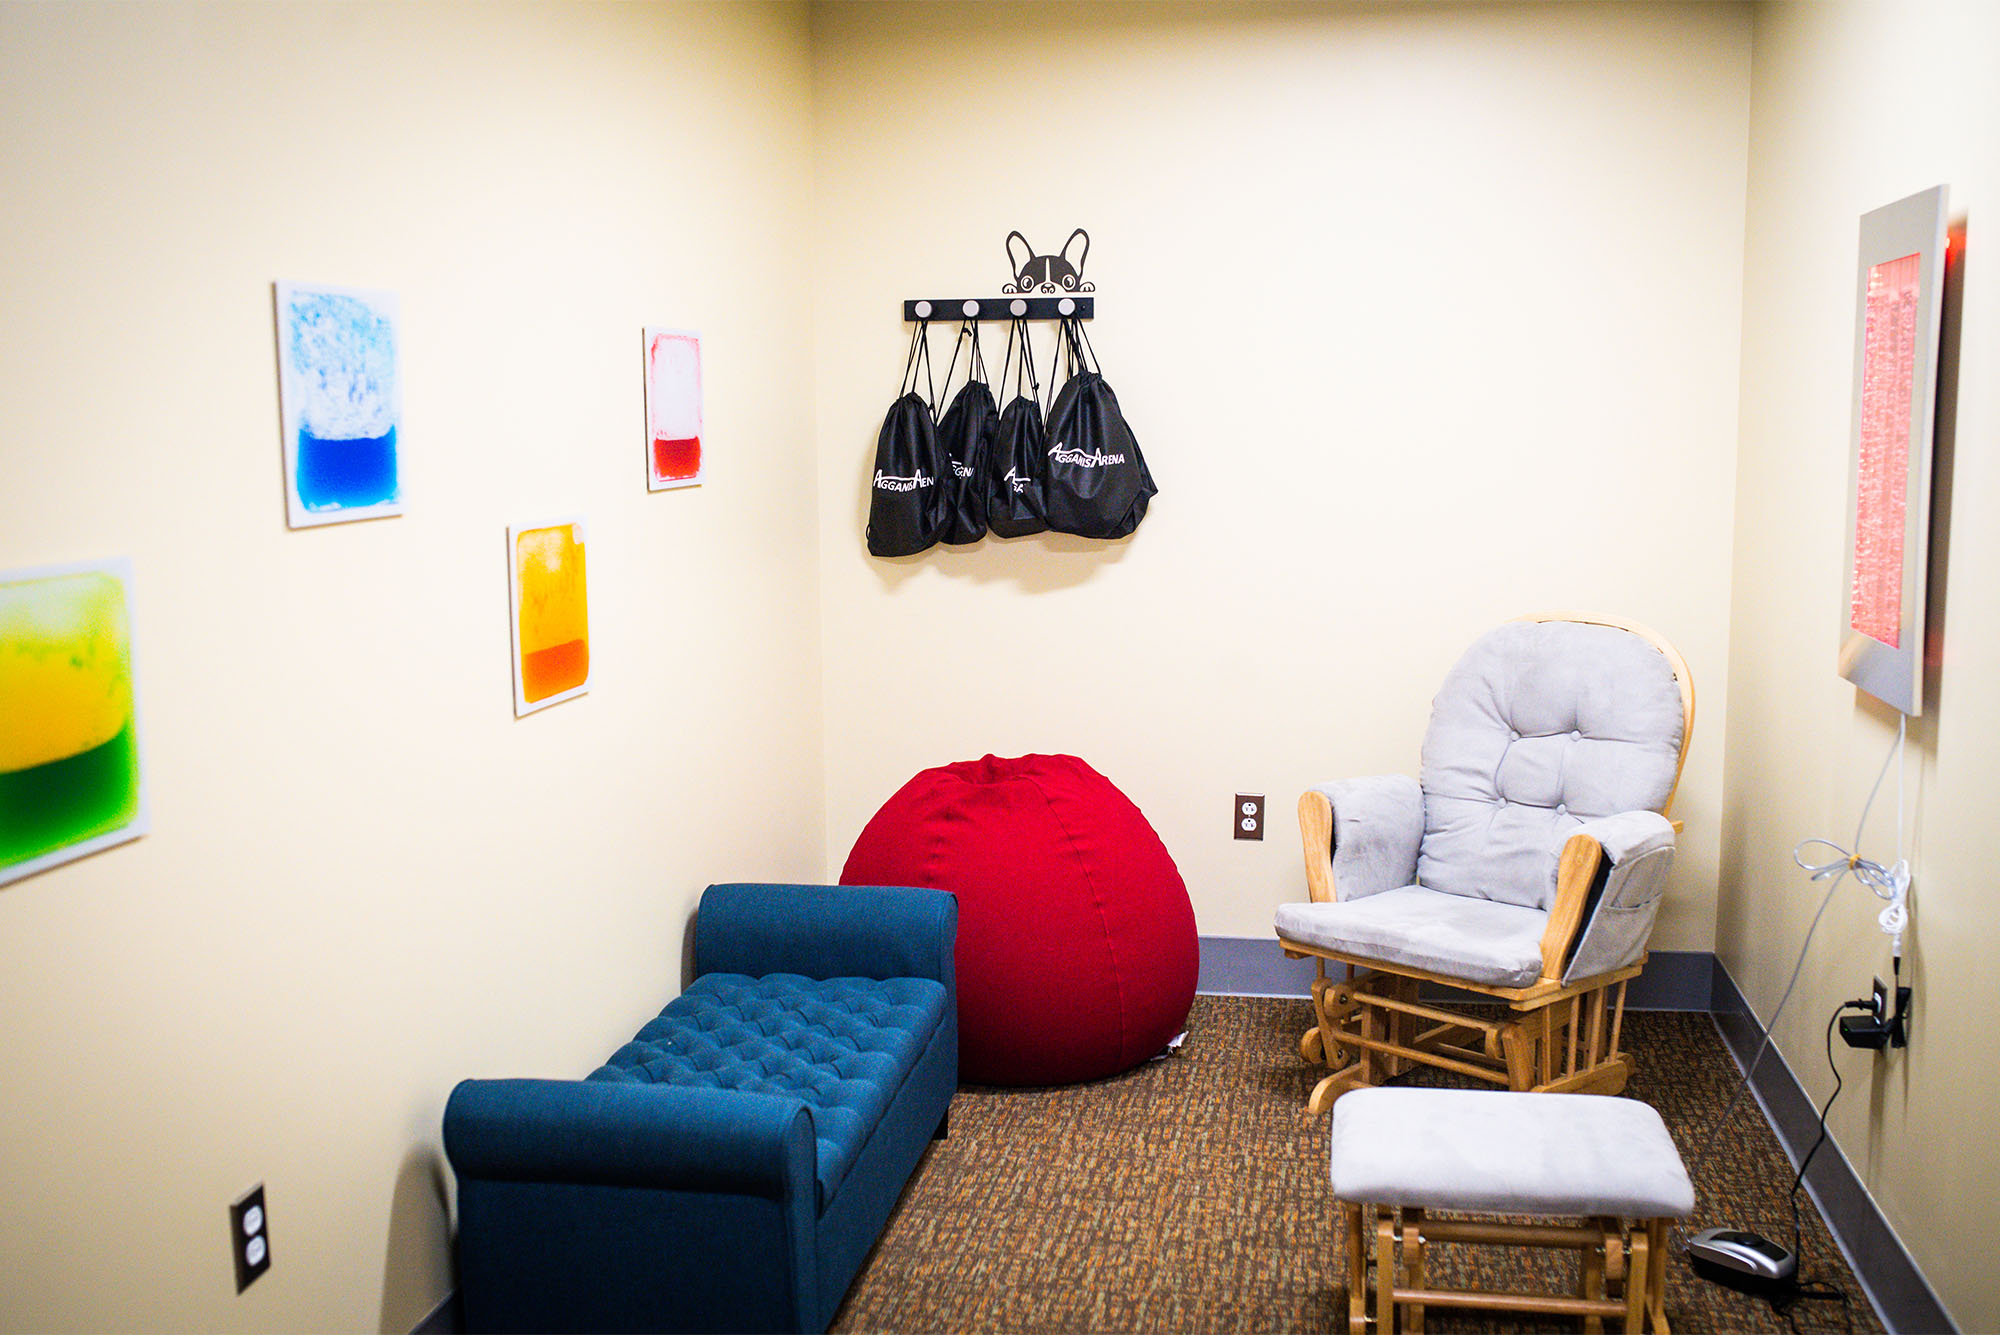 The Agganis Arena staff believes their new sensory room is the first of its kind at any sports or live event venue in the Greater Boston area. Photo by Jackie Ricciardi. Photo depicts a small room with beanbag chairs and other seating, with small trinkets and toys to play with as well as colorful art on the walls.